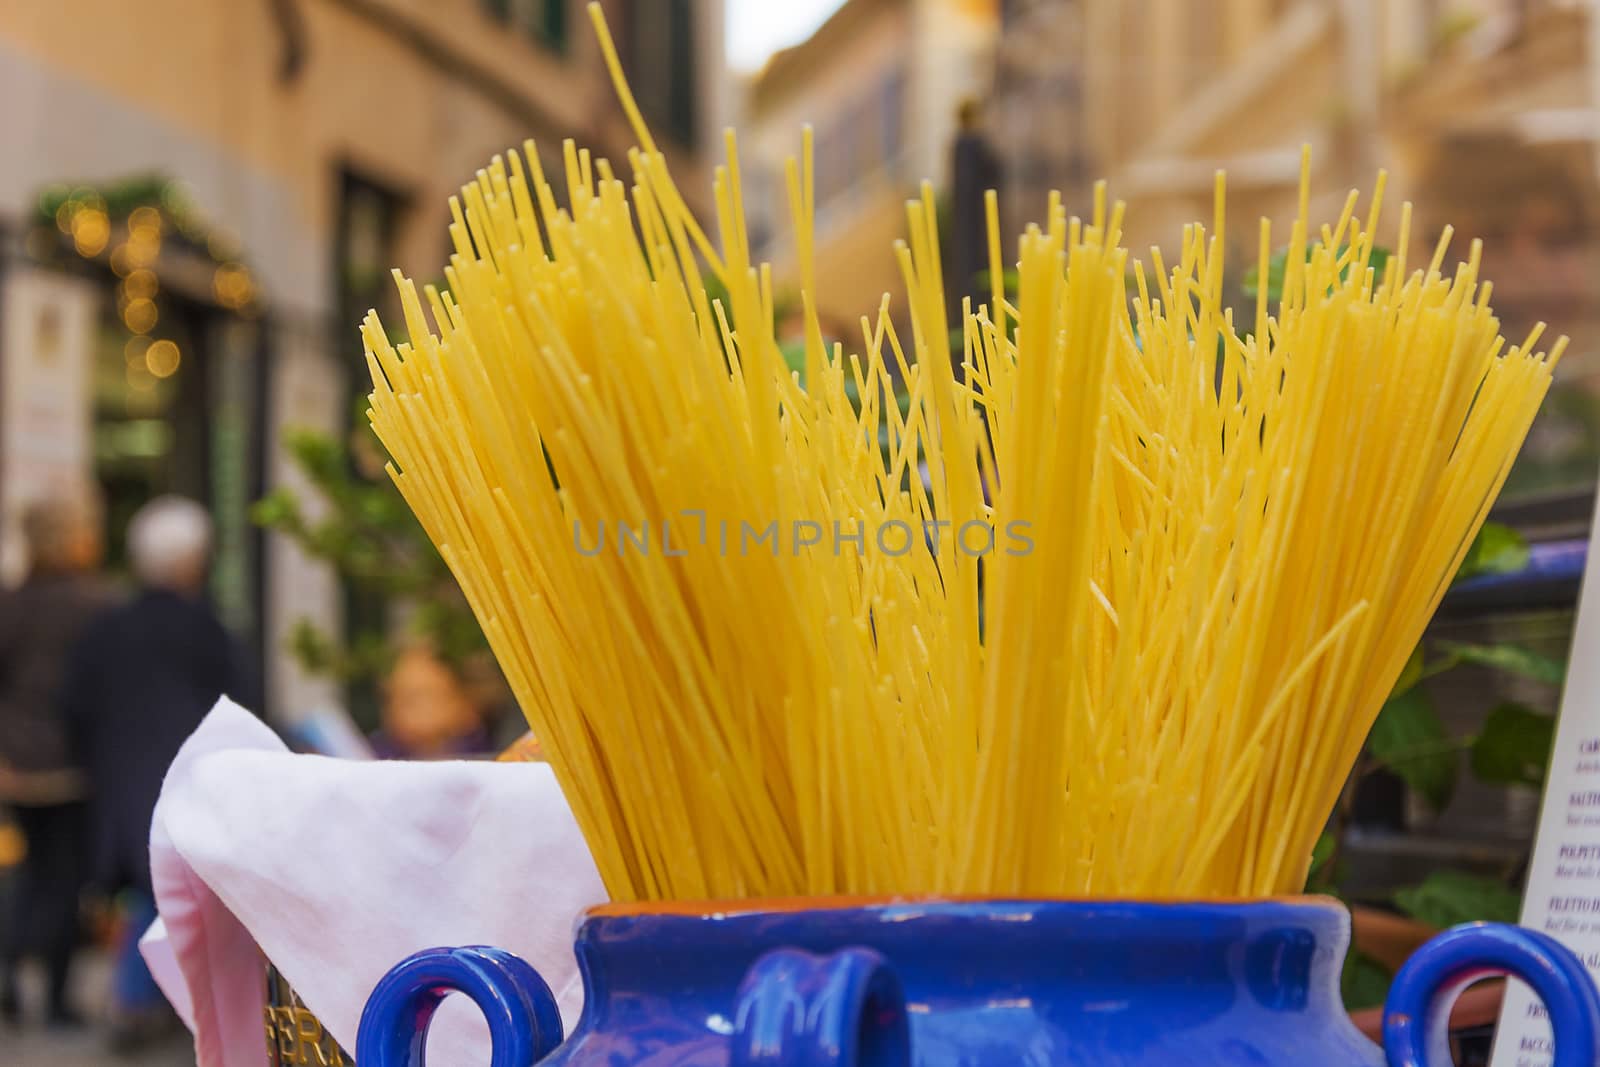 Bundle of uncooked dried Italian spaghetti in a jar in the ancient streets of Rome